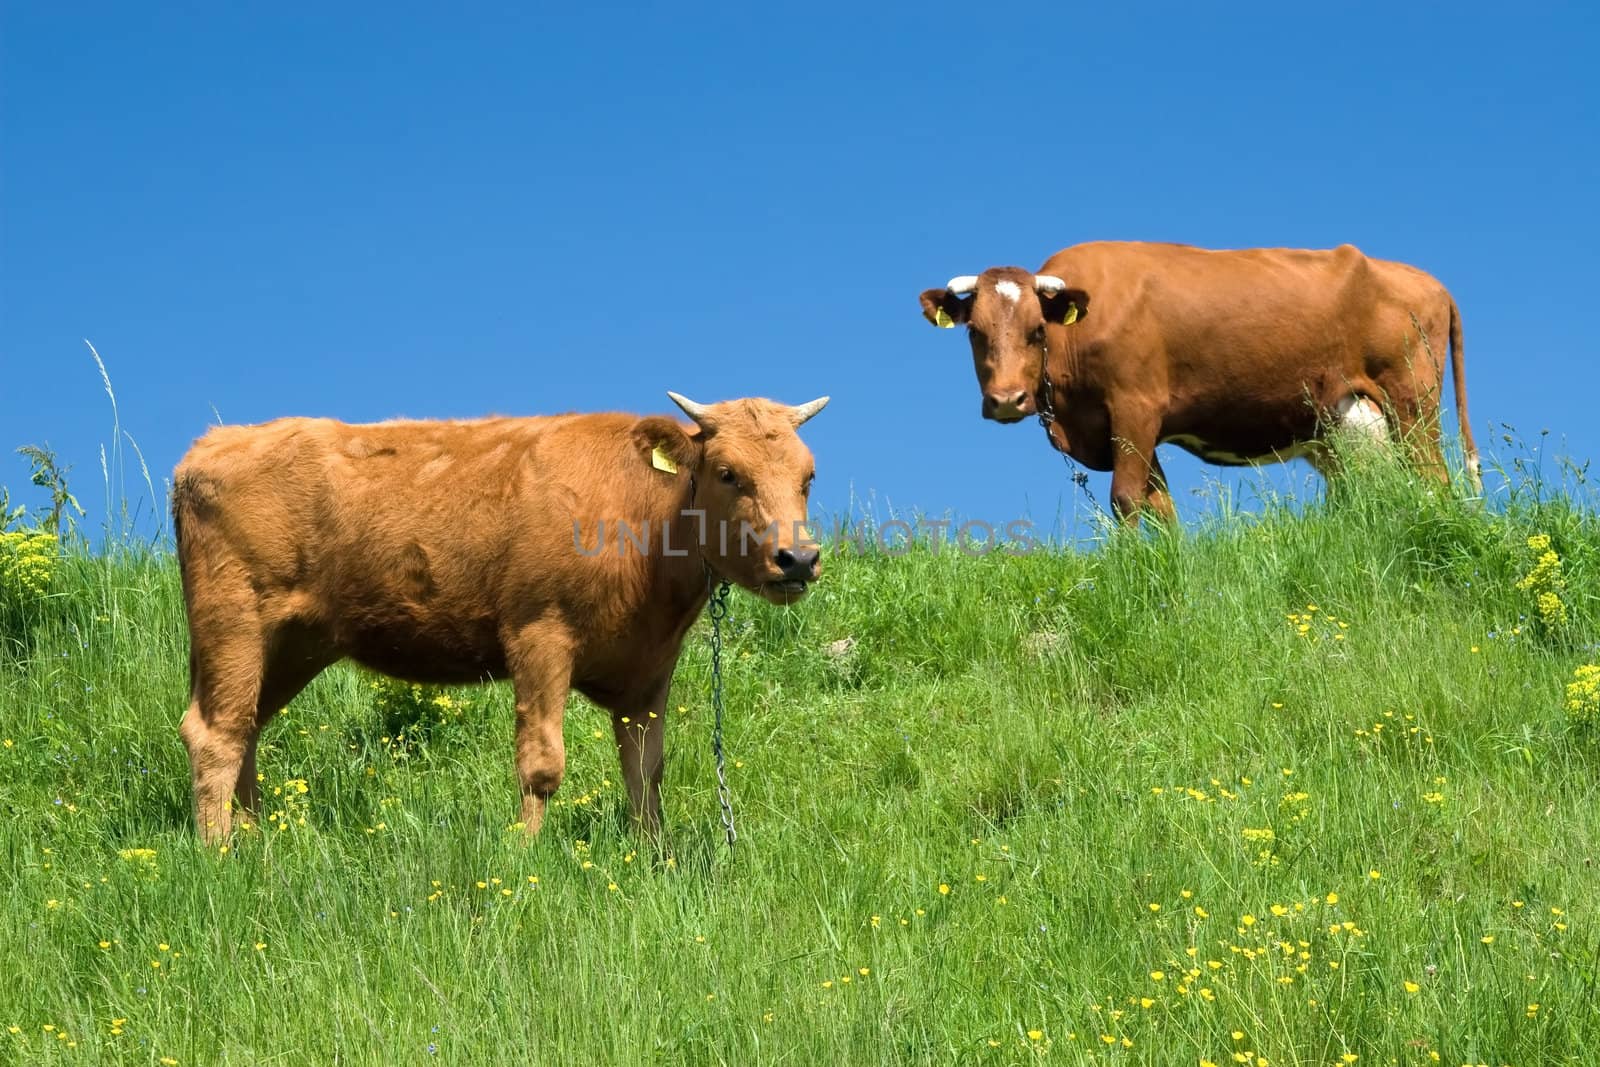 Brown calf and adult cow on the meadow against blue sky